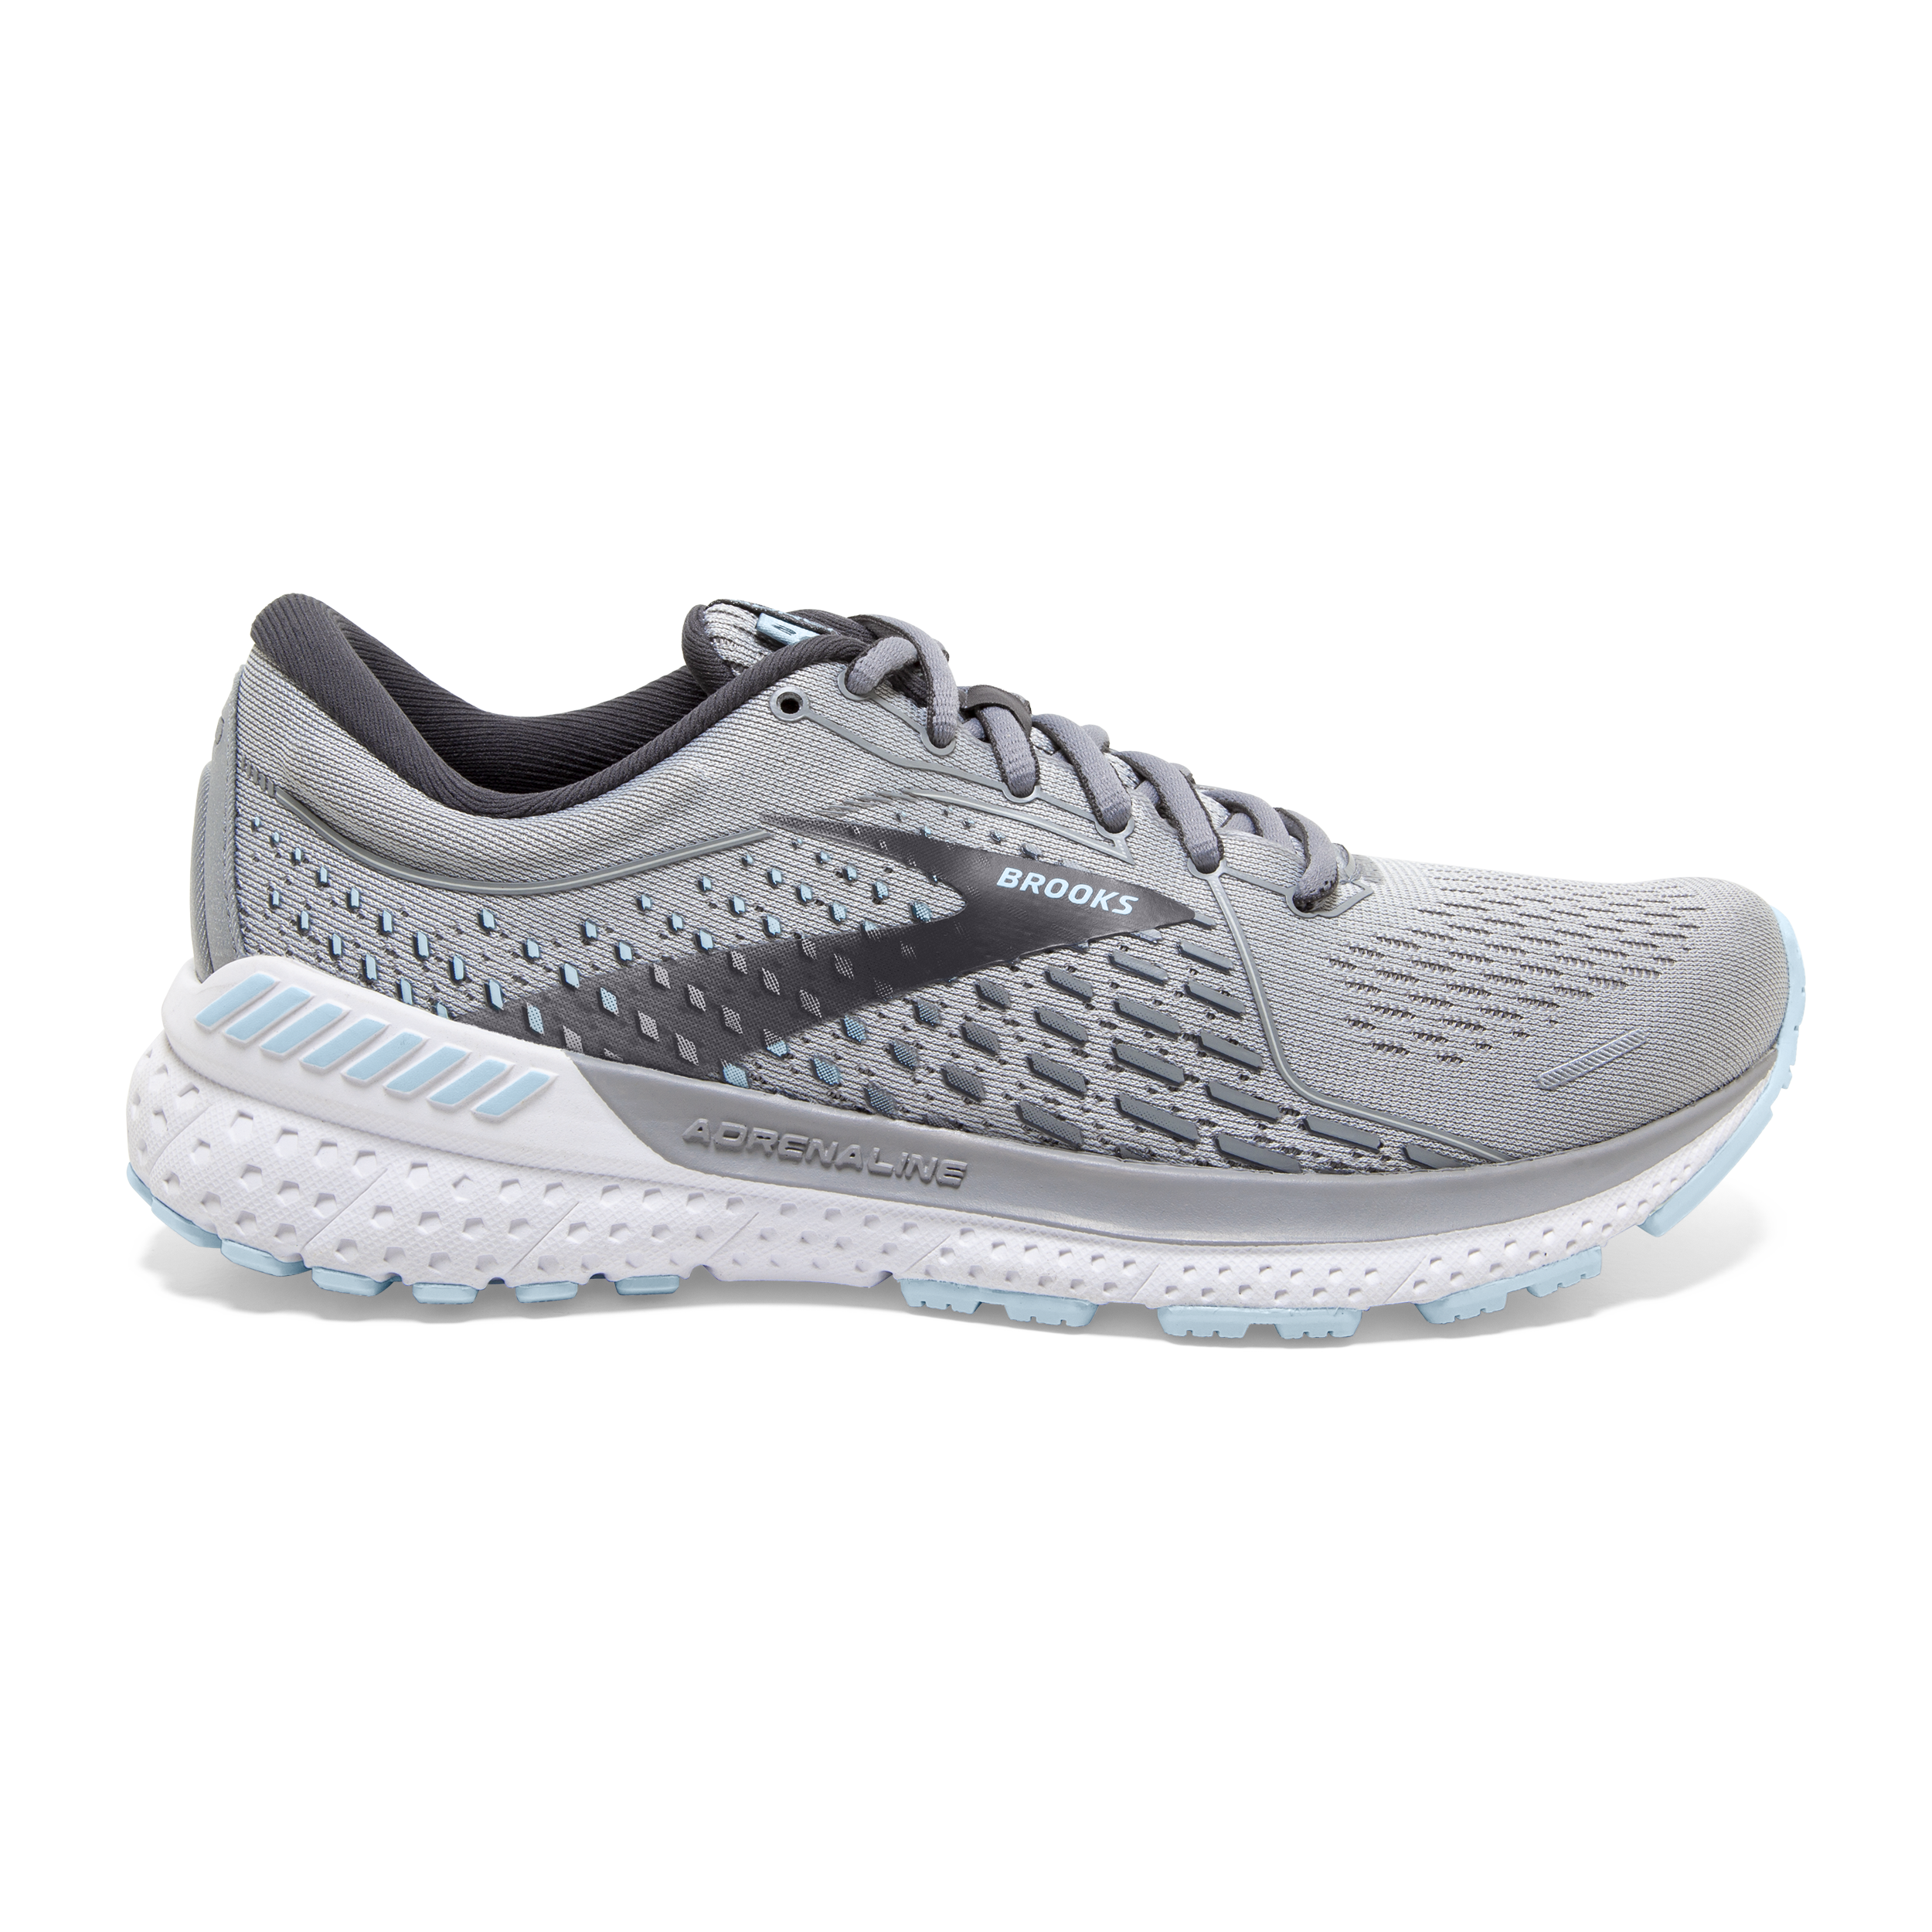 Overpronation Running Shoes with Arch 